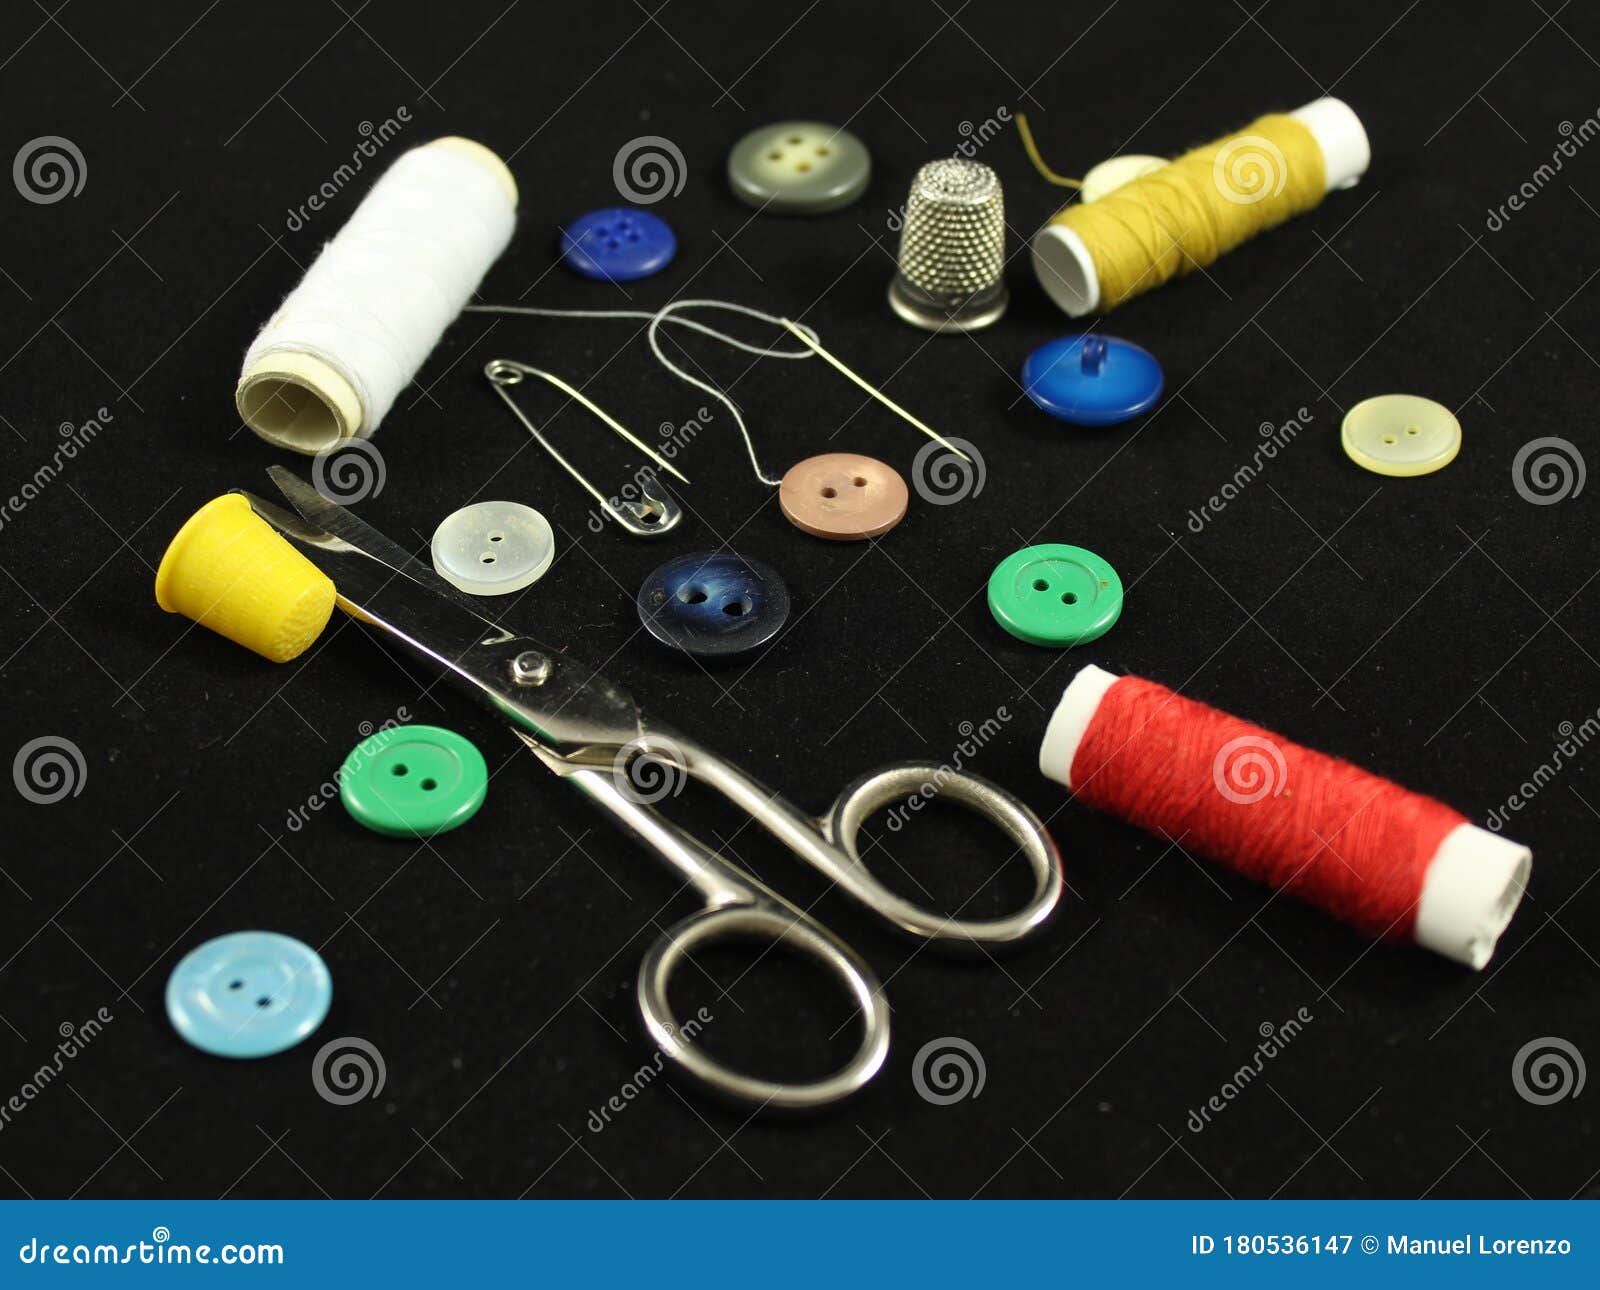 sewing needle thread scissors thimble tailor buttons